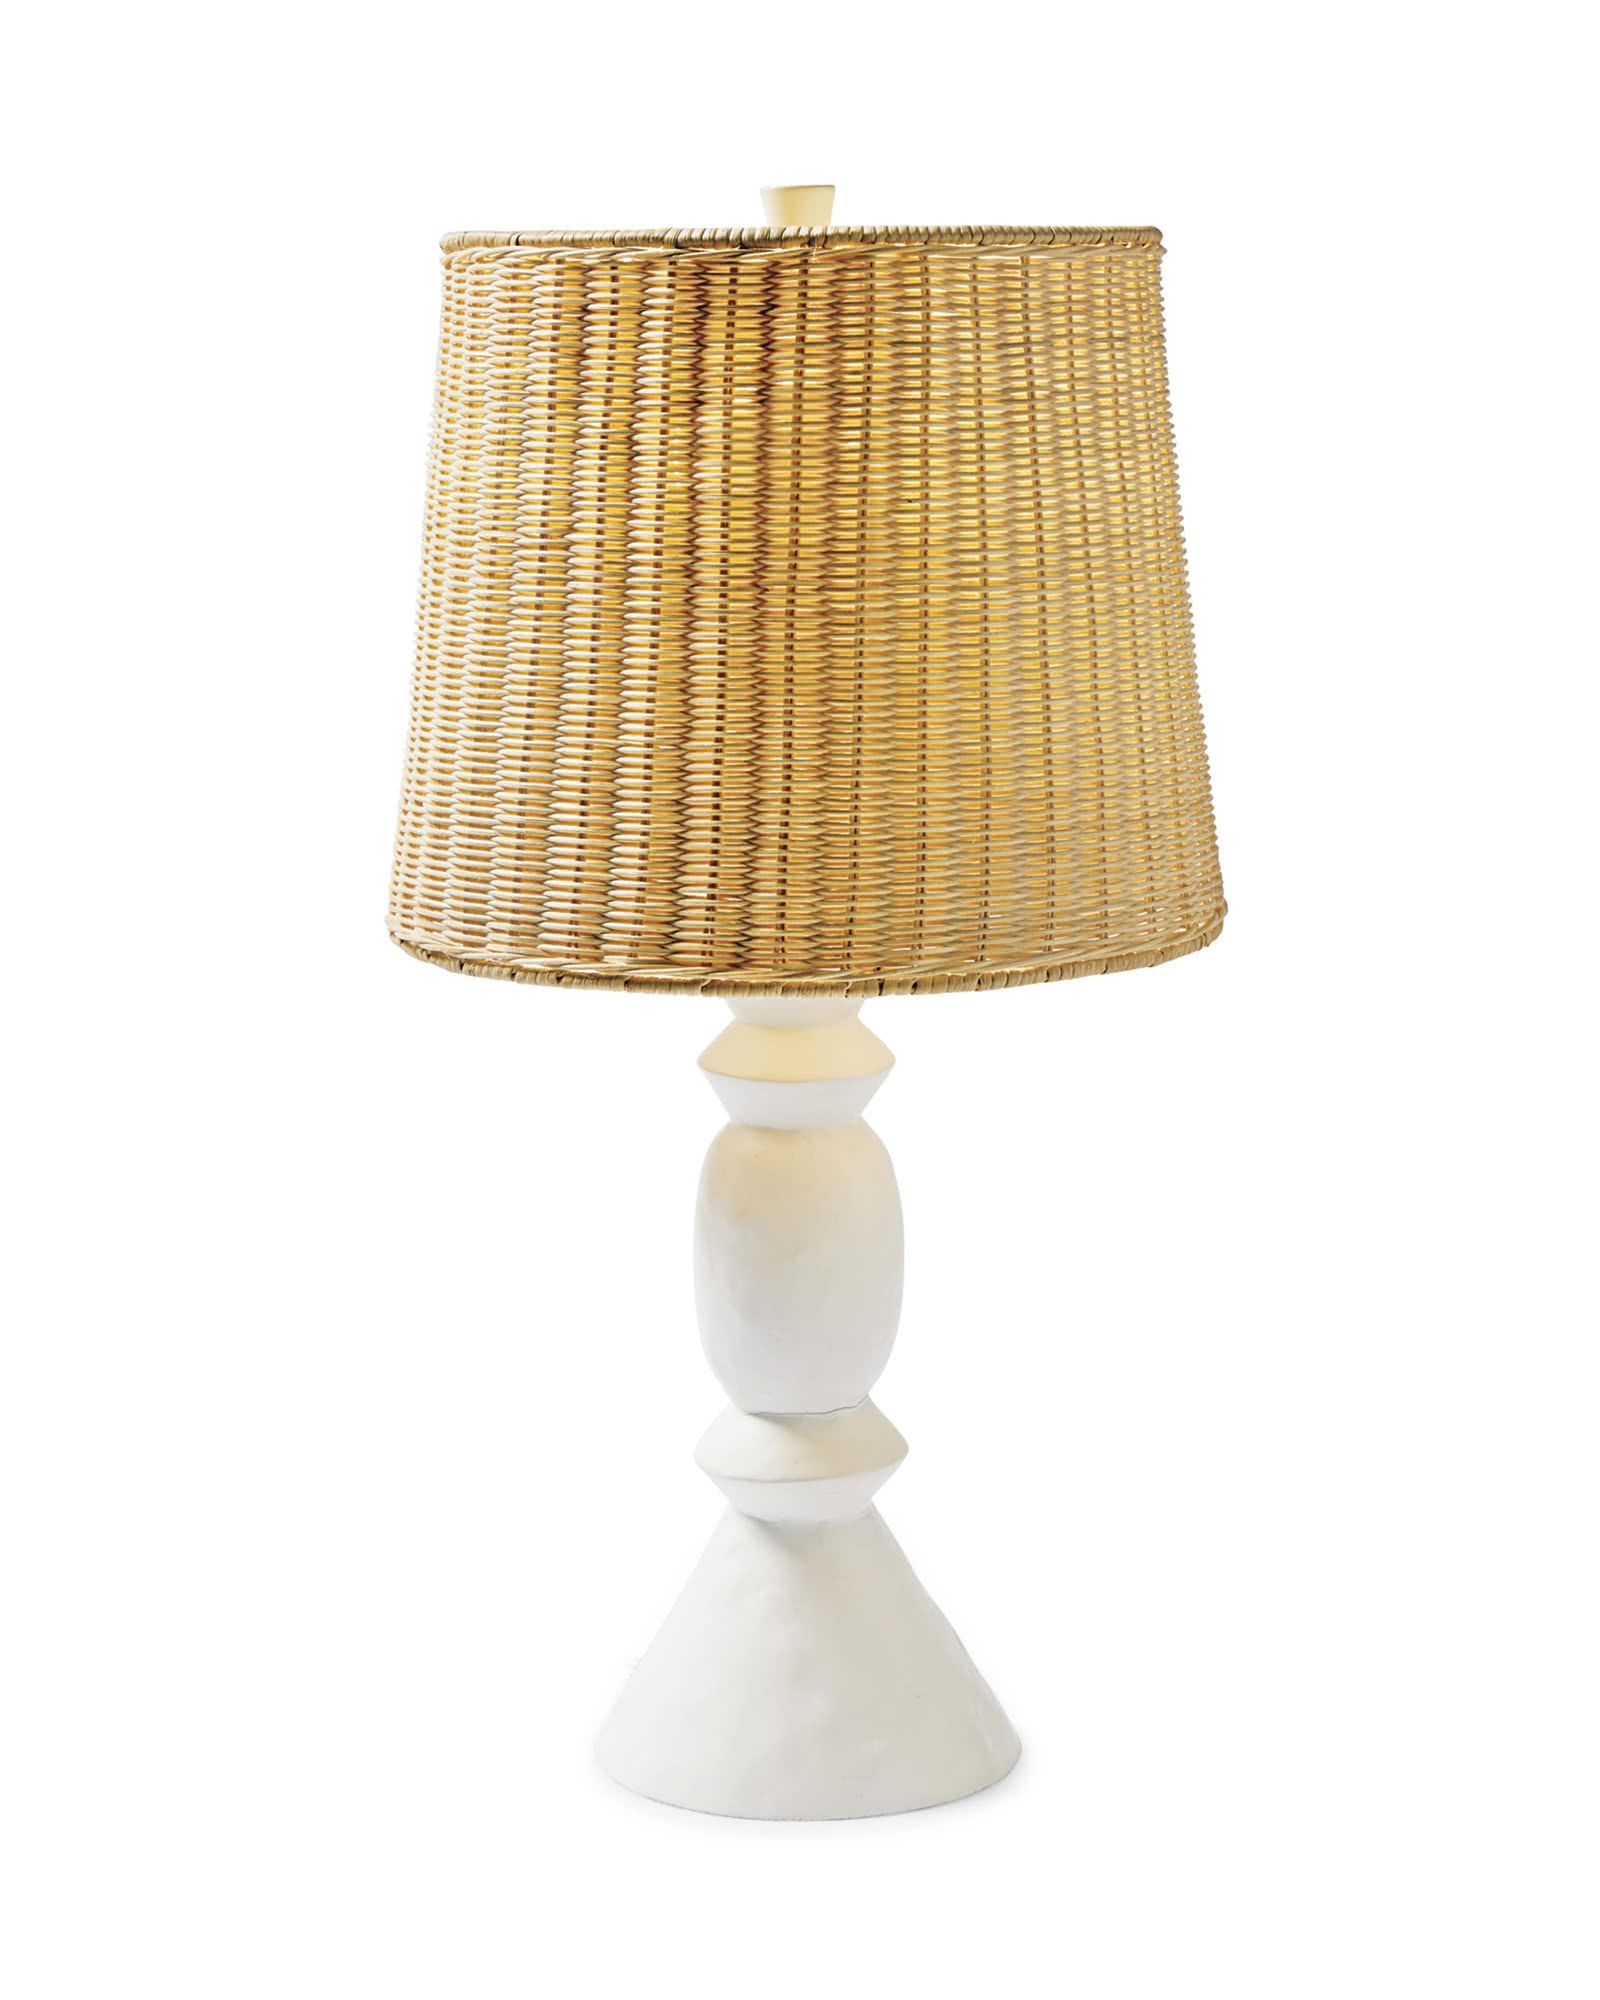 Small Brighton Table Lamp | Serena and Lily